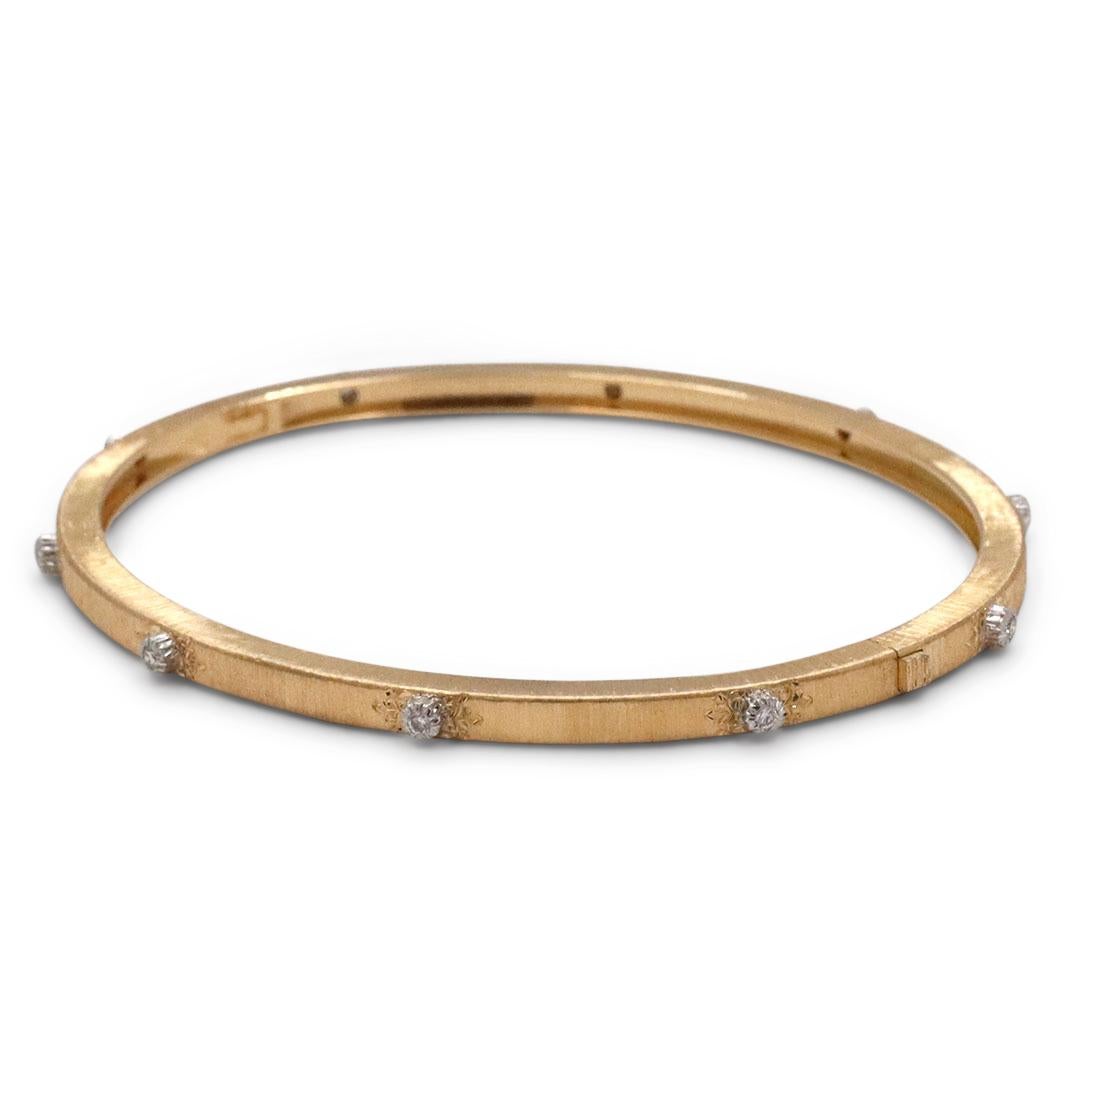 Authentic Buccellati 'Macri Classica' bracelet crafted in 18 karat yellow gold.  The classic Buccellati bracelet features a Florentine finish and is set with 10 round brilliant diamonds weighing an estimated .10 carats total.  The bracelet measures